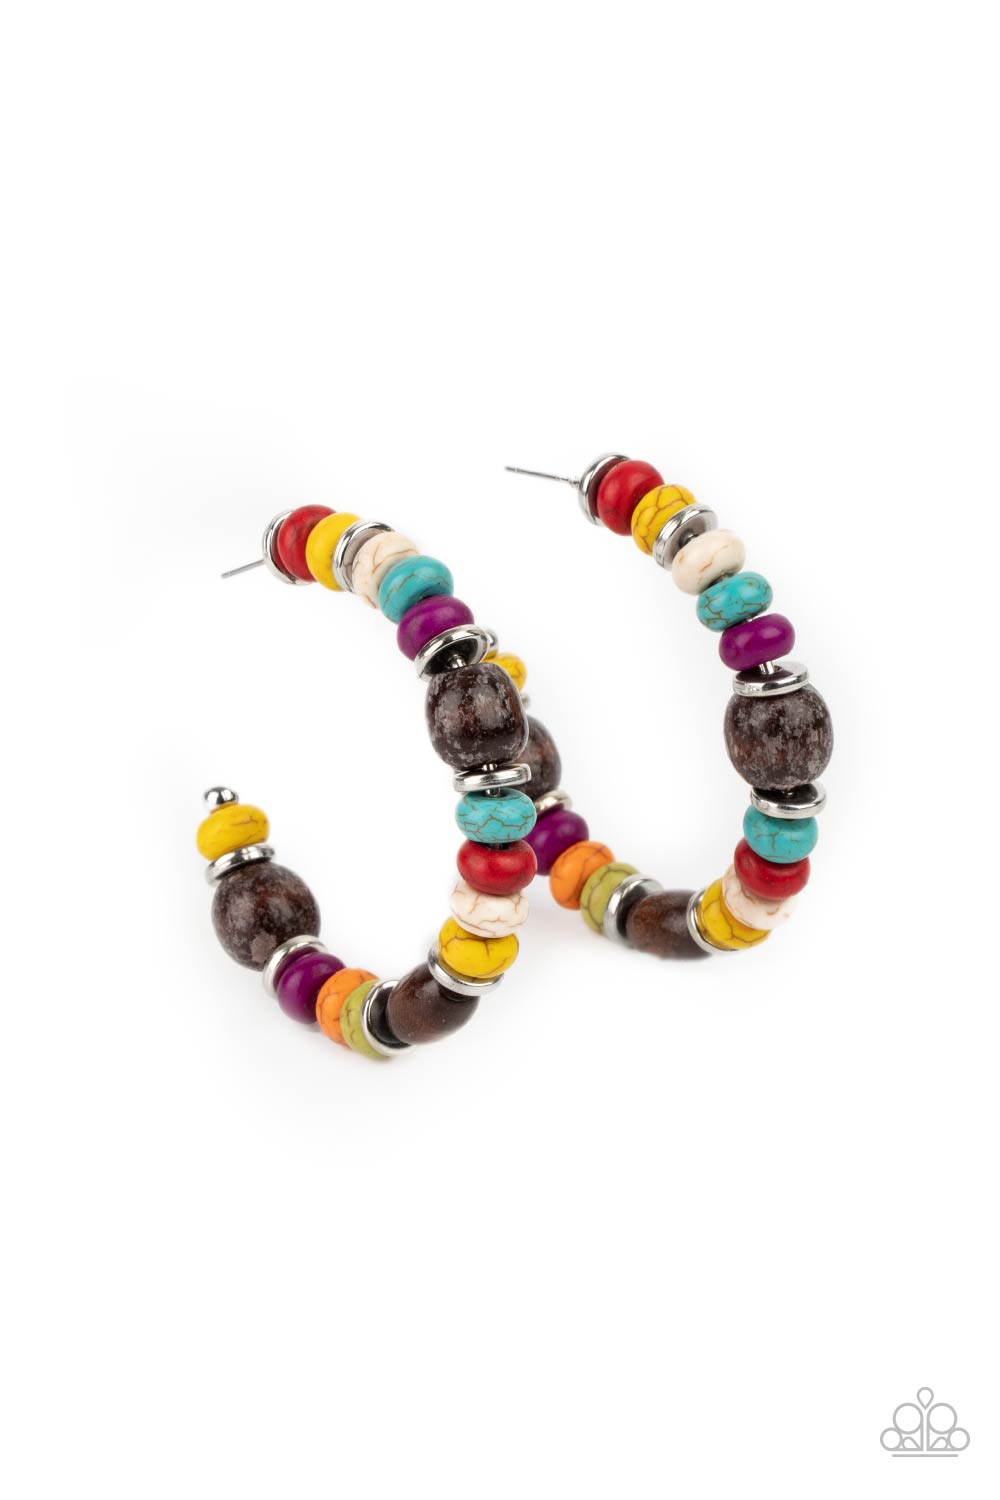 An earthy collection of multicolored stone beads, silver discs, and brown wooden beads are delicately threaded along a dainty wire, creating an artisan inspired hoop. Earring attaches to a standard post fitting. Hoop measures approximately 2" in diameter.